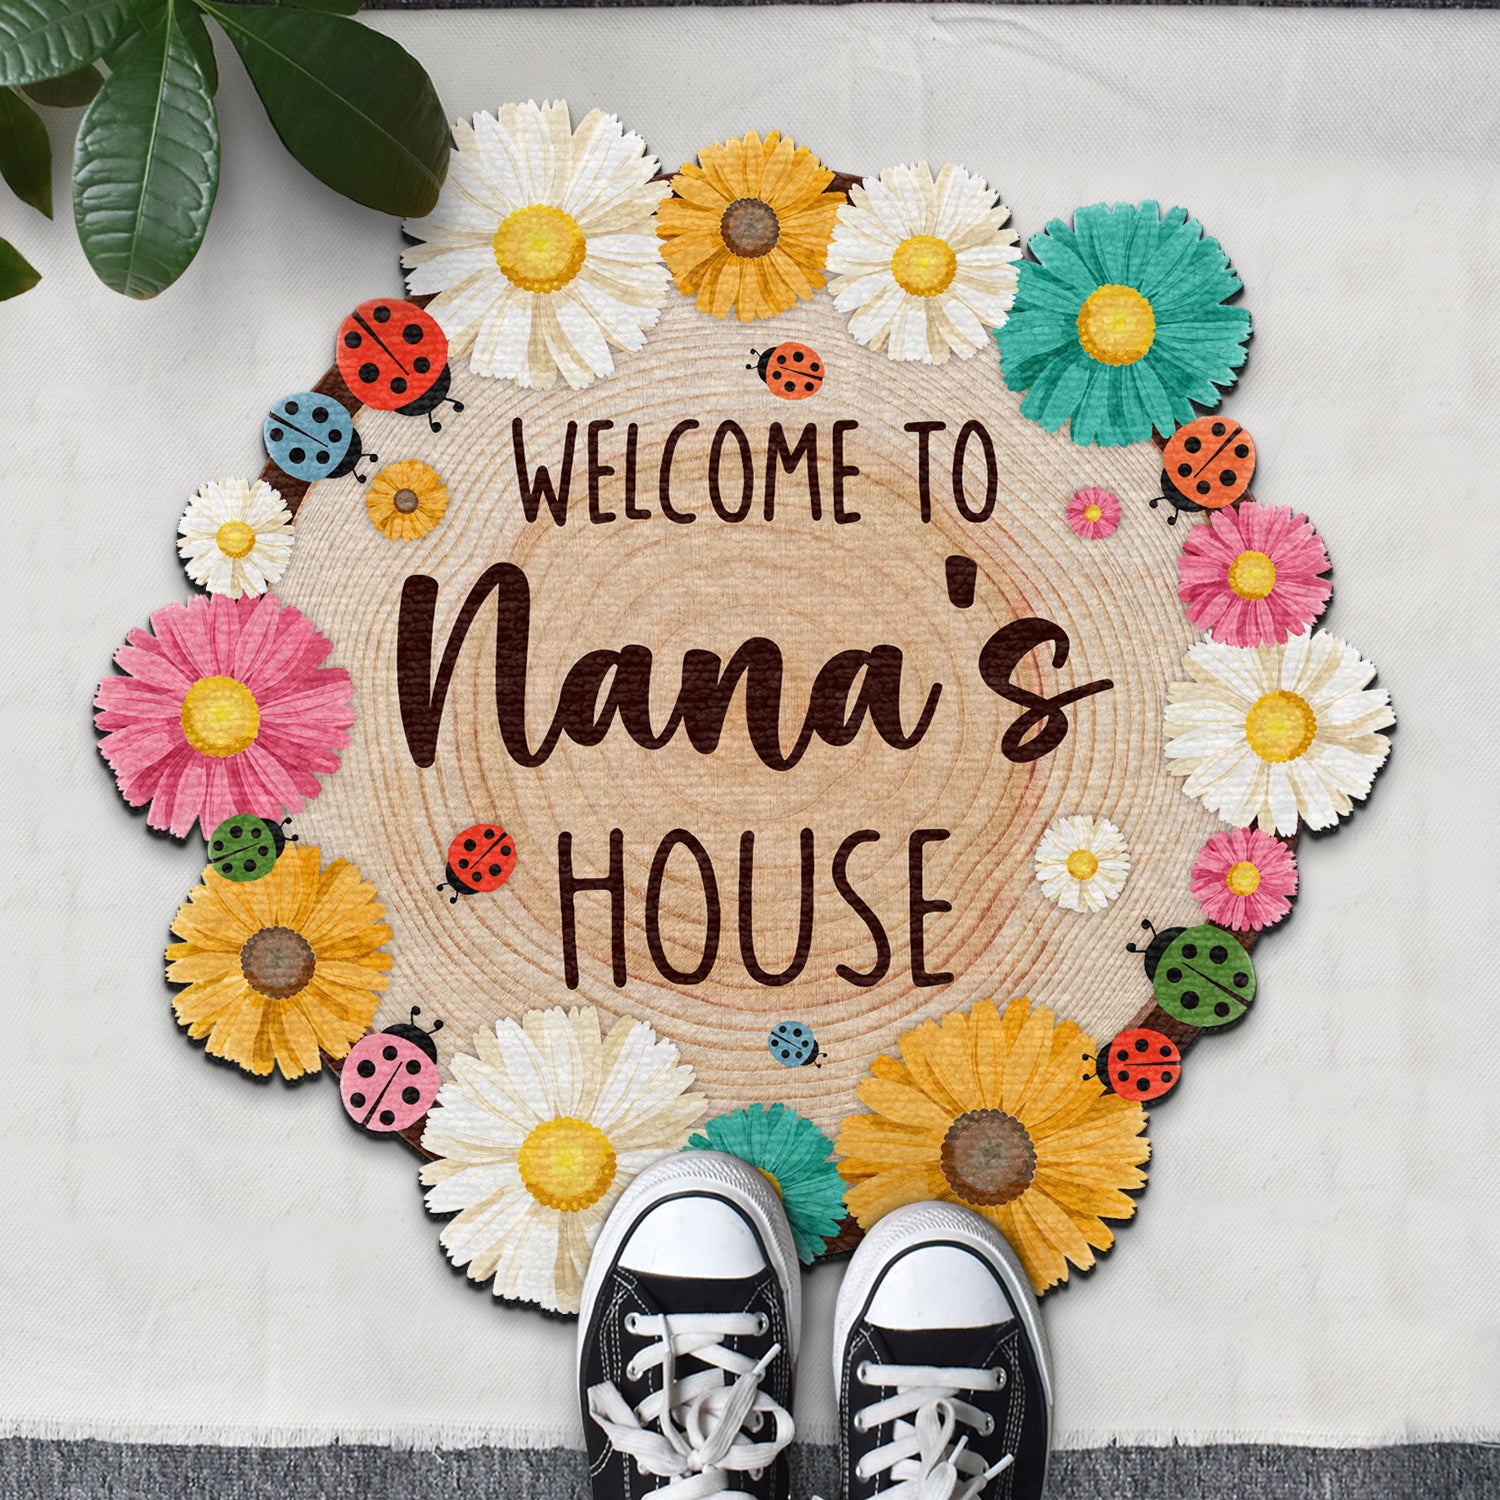 Welcome To Nana's House - Gift For Grandma - Personalized Custom Shaped Doormat